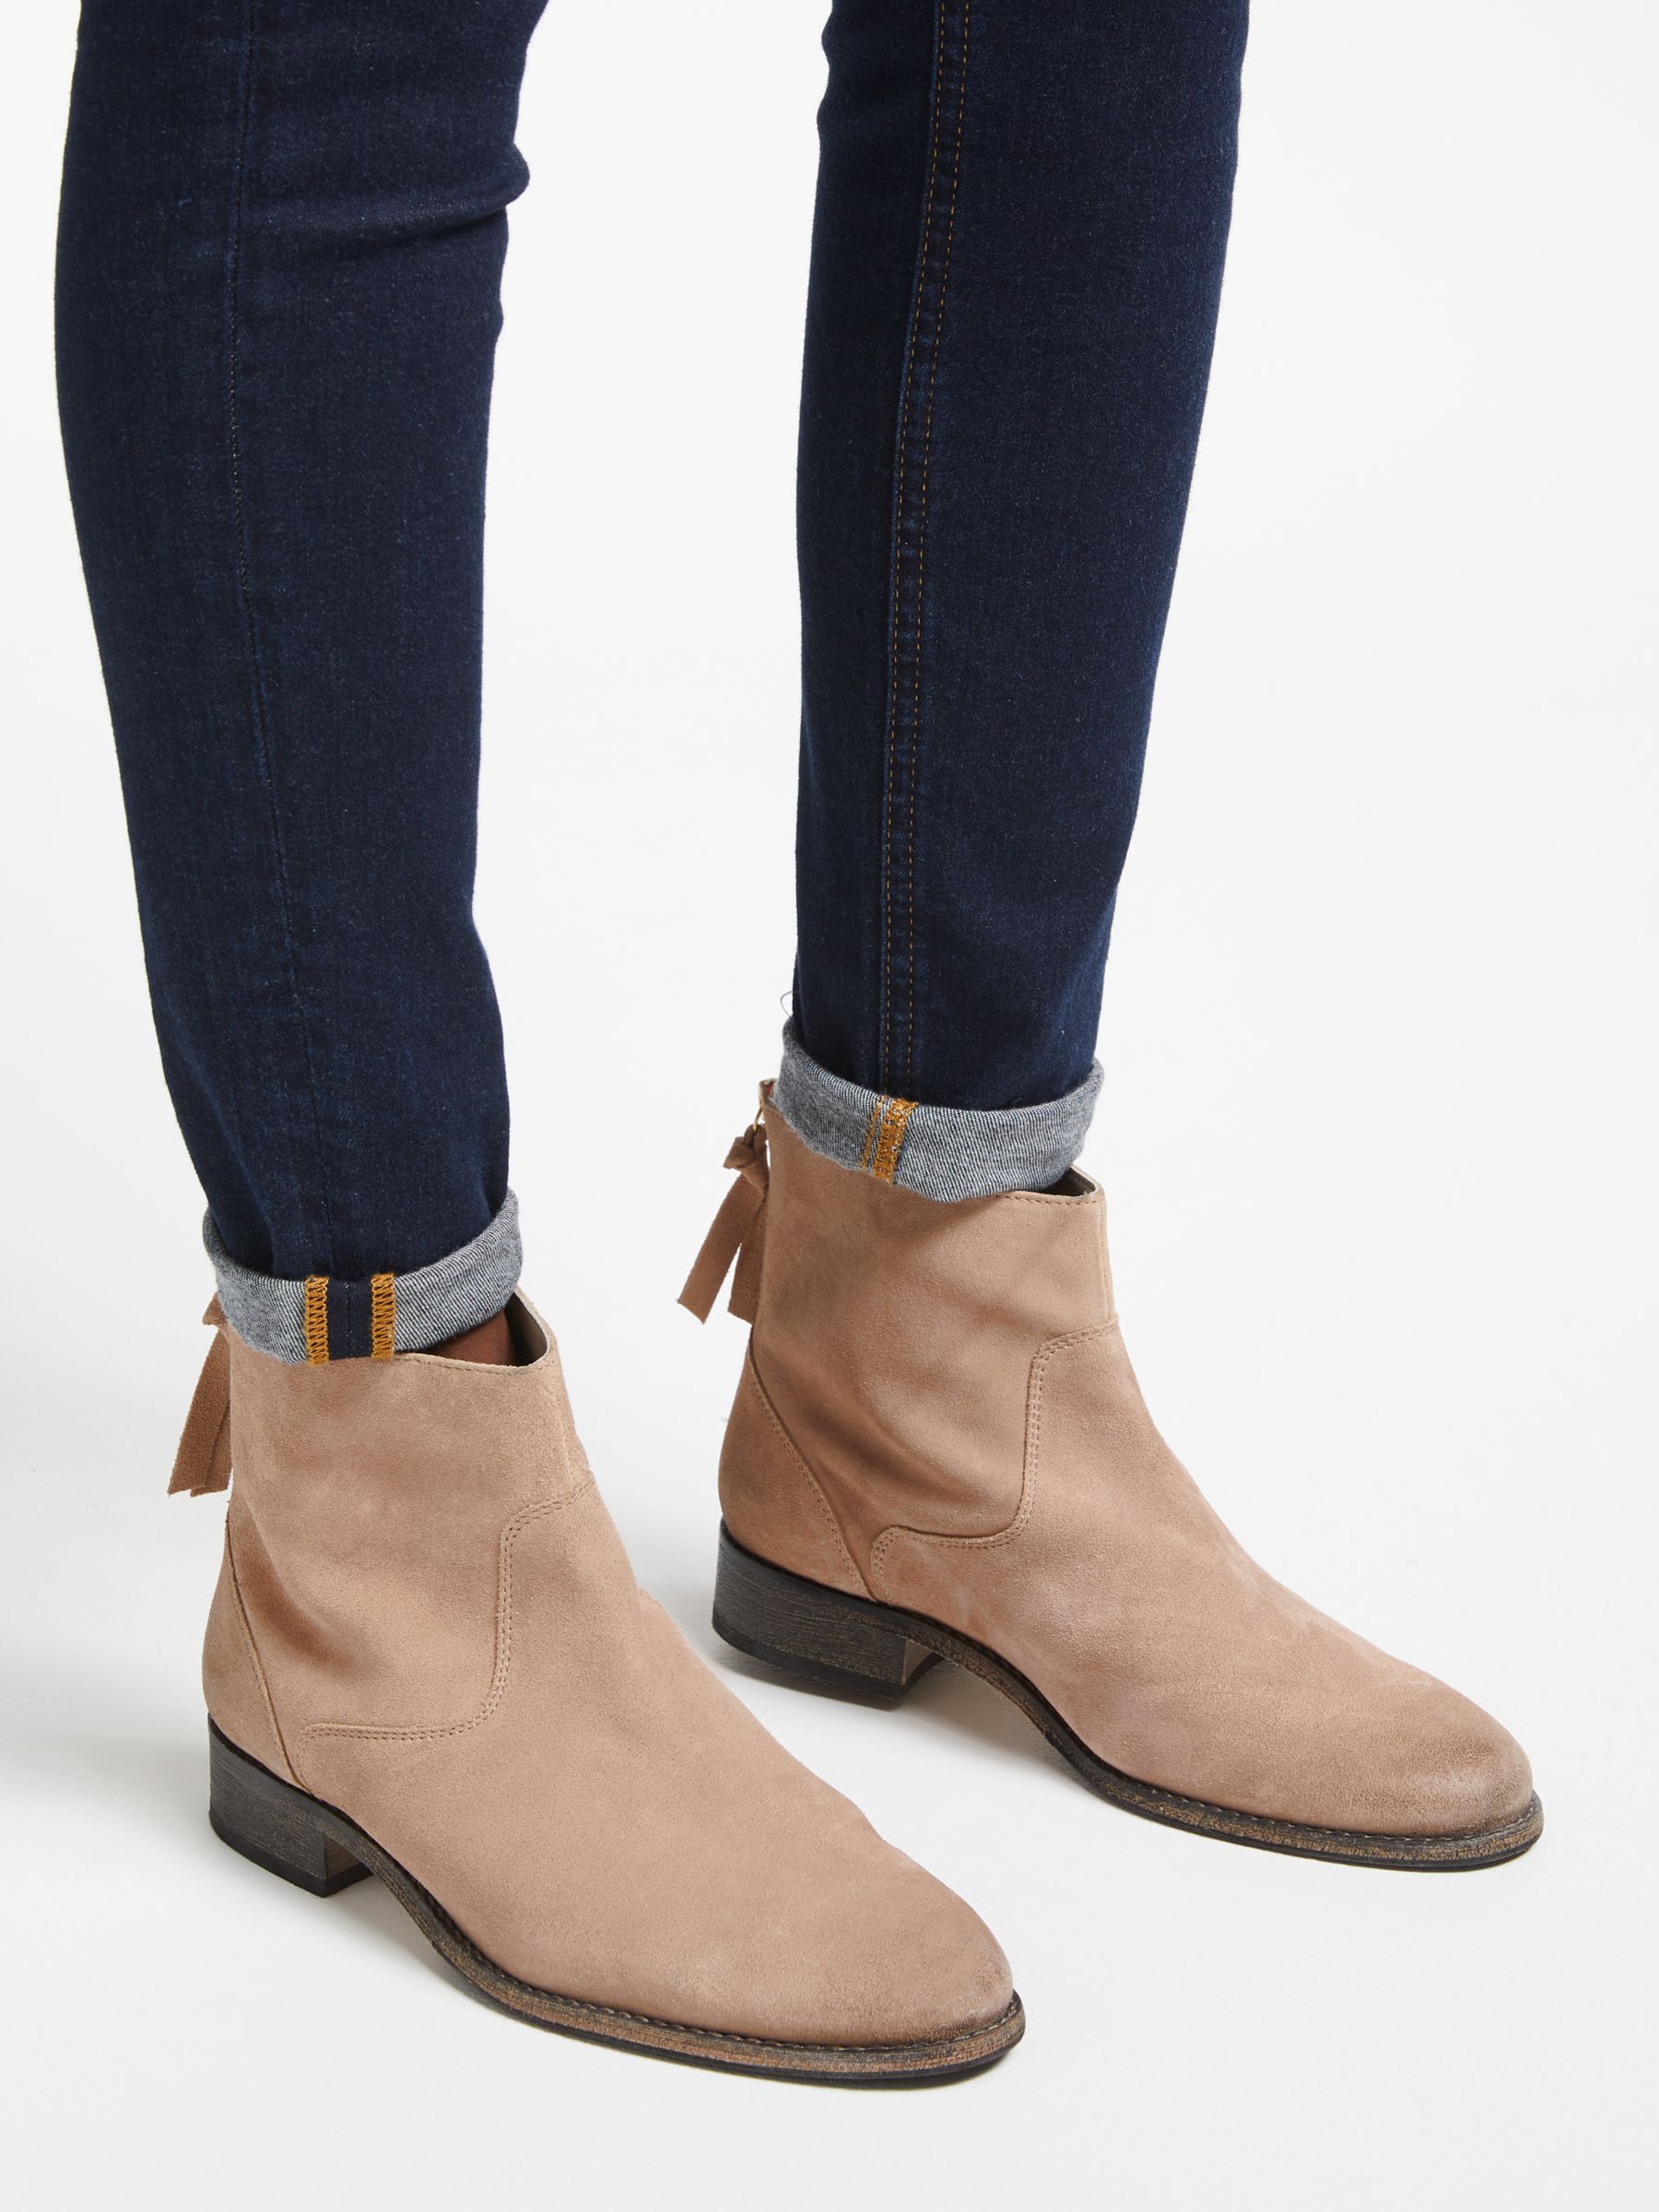 boden suede boots